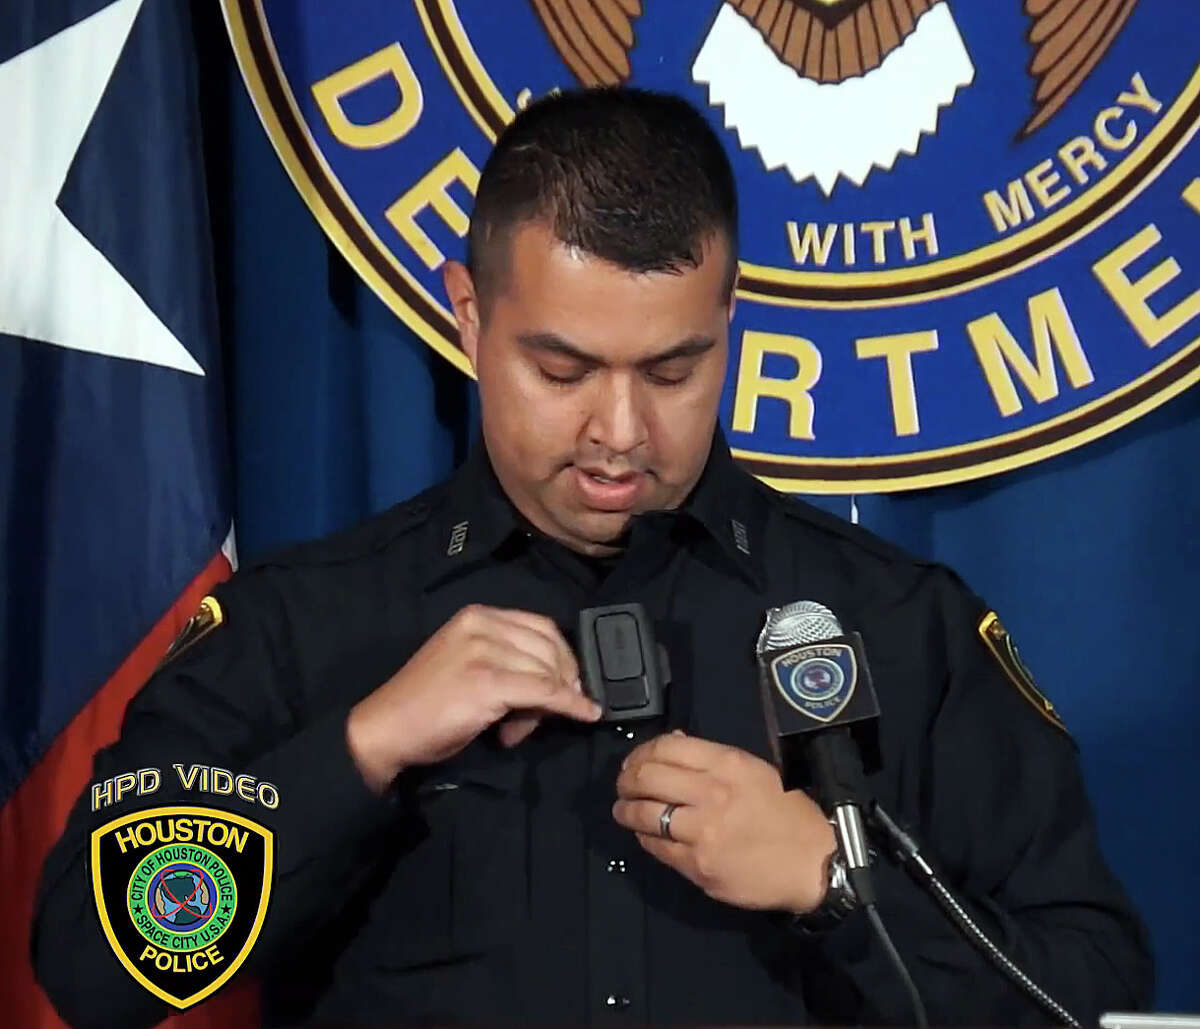 Jose Zapata of the North Patrol Division demonstrates a body camera manufactured by Vievu in this 2013 photo.